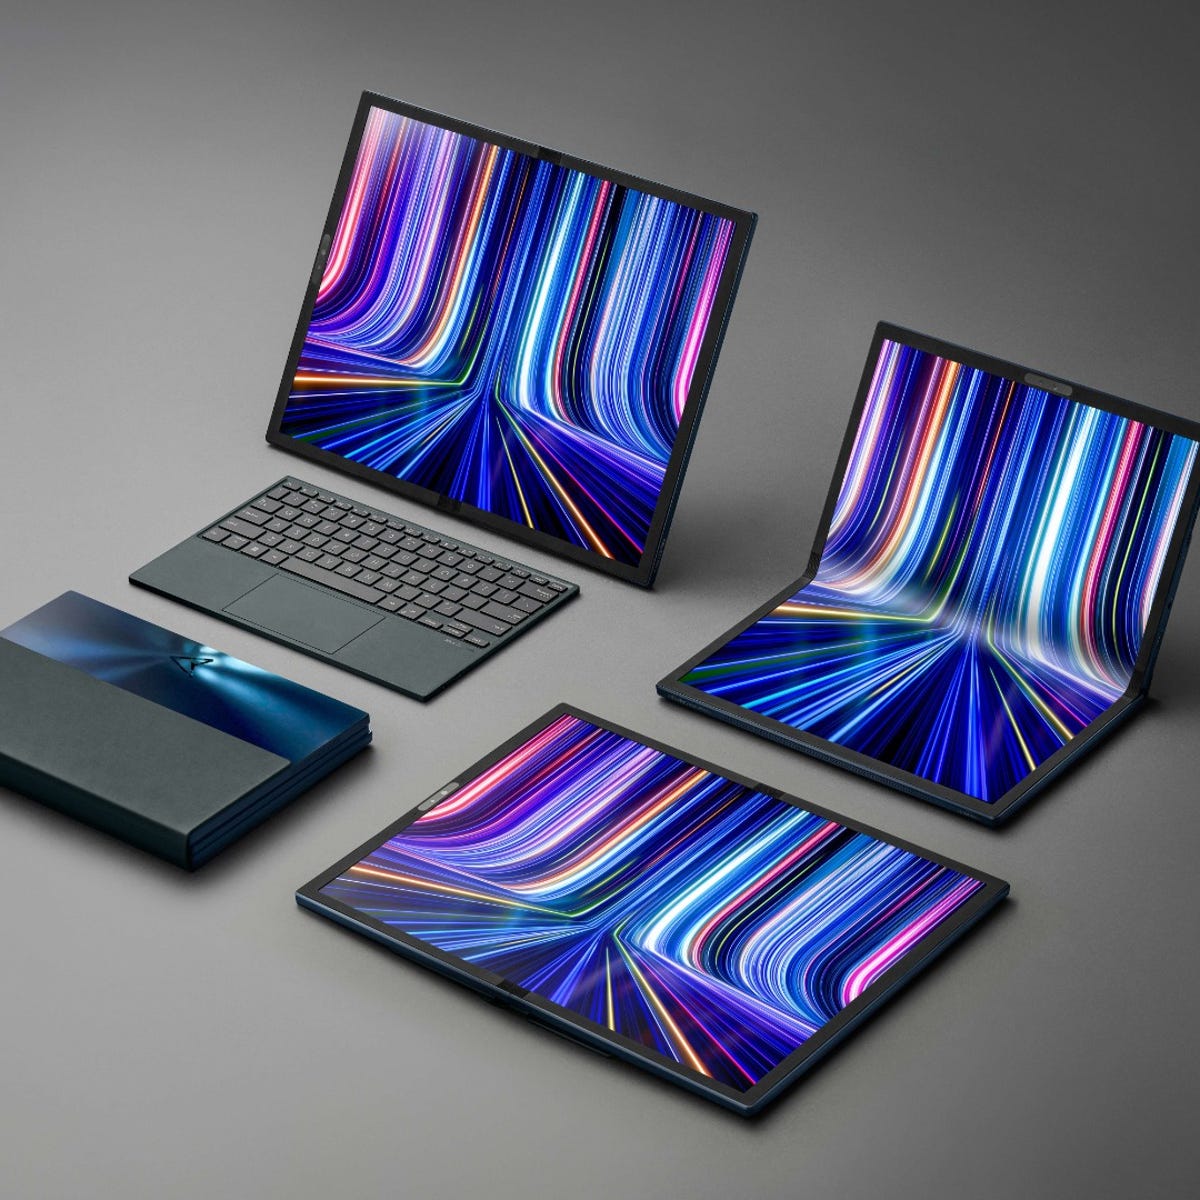 CES 2022: Asus launches 17-inch folding OLED laptop and space-themed  Zenbook